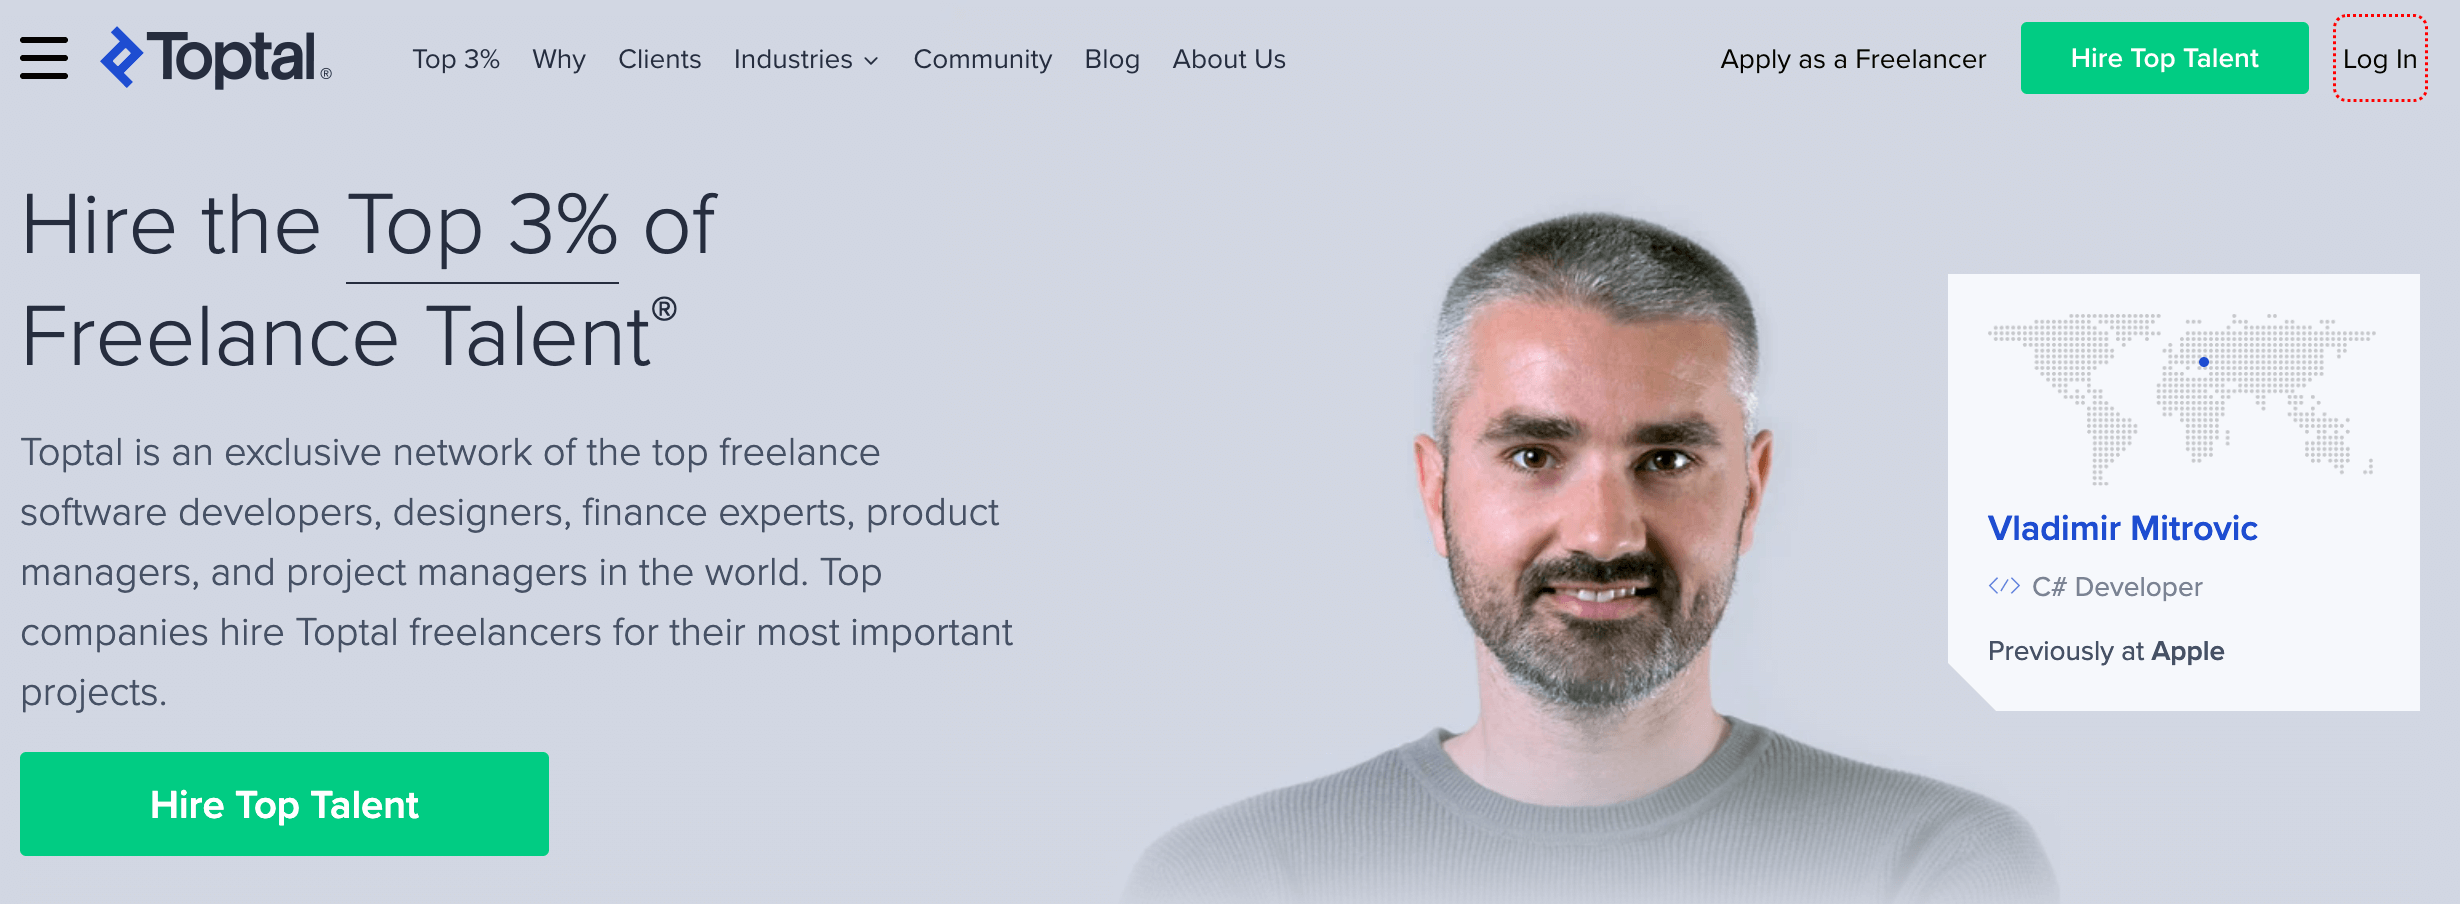 Toptal home page written hire top 3% freelance talent